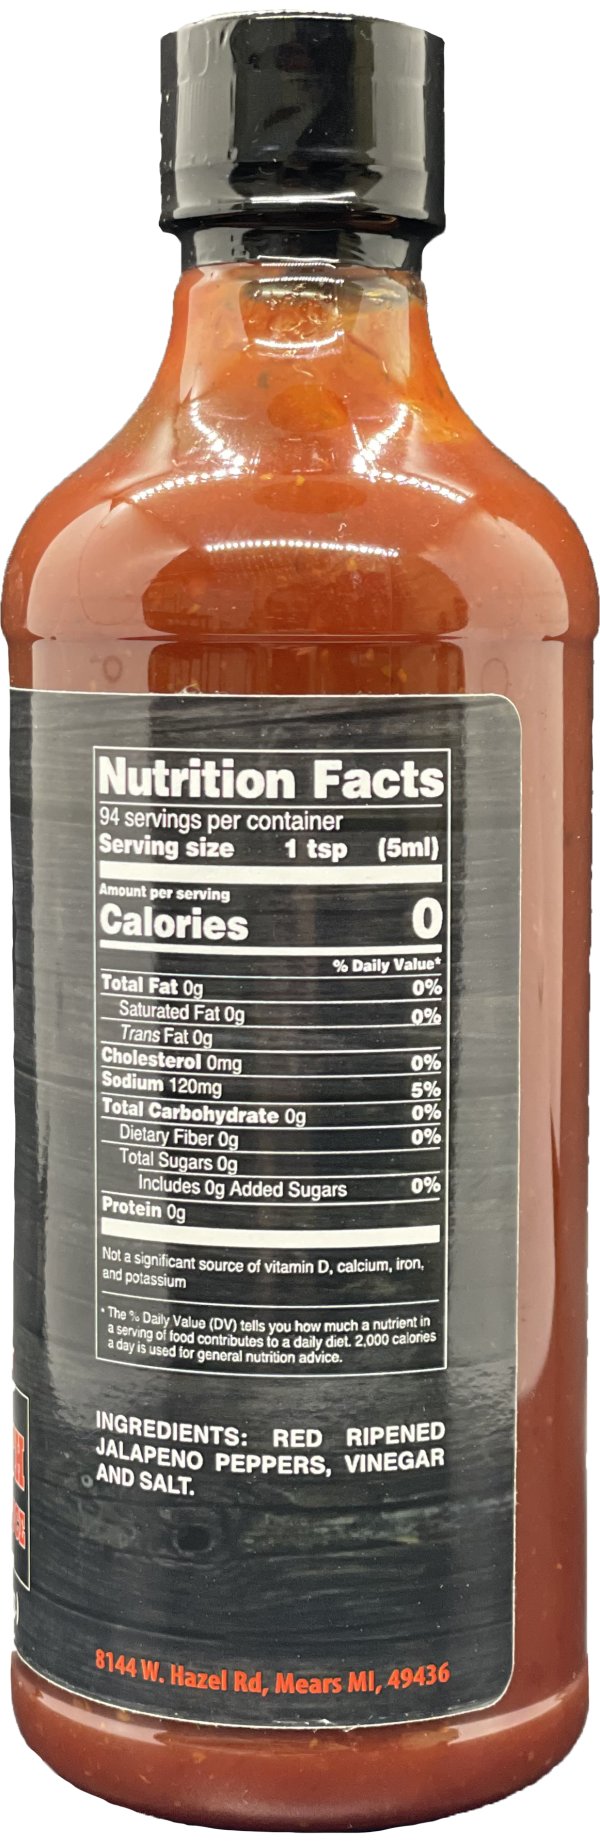 Hogs Breath Jalapeno Hot Sauce Nutrition Facts